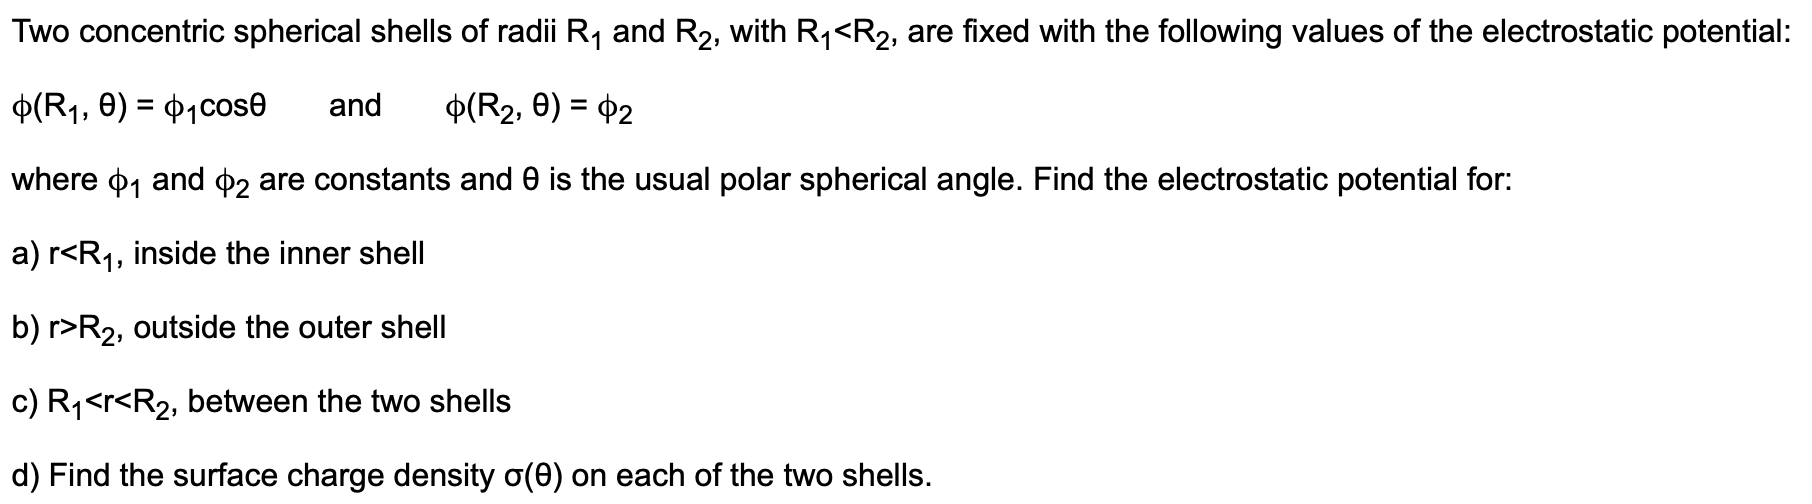 Two concentric spherical shells of radii R1 and R2, with R1<R2, are fixed with the following values of the electrostatic potential:
p(R1, e) P1Cose
and
p(R2, 0) 2
where p1 and p2
are constants and 0 is the usual polar spherical angle. Find the electrostatic potential for:
a) r<R1, inside the inner shell
b) r R2, outside the outer shell
c) R1<r<R2, between the two shells
d) Find the surface charge density o(e) on each of the two shells.
